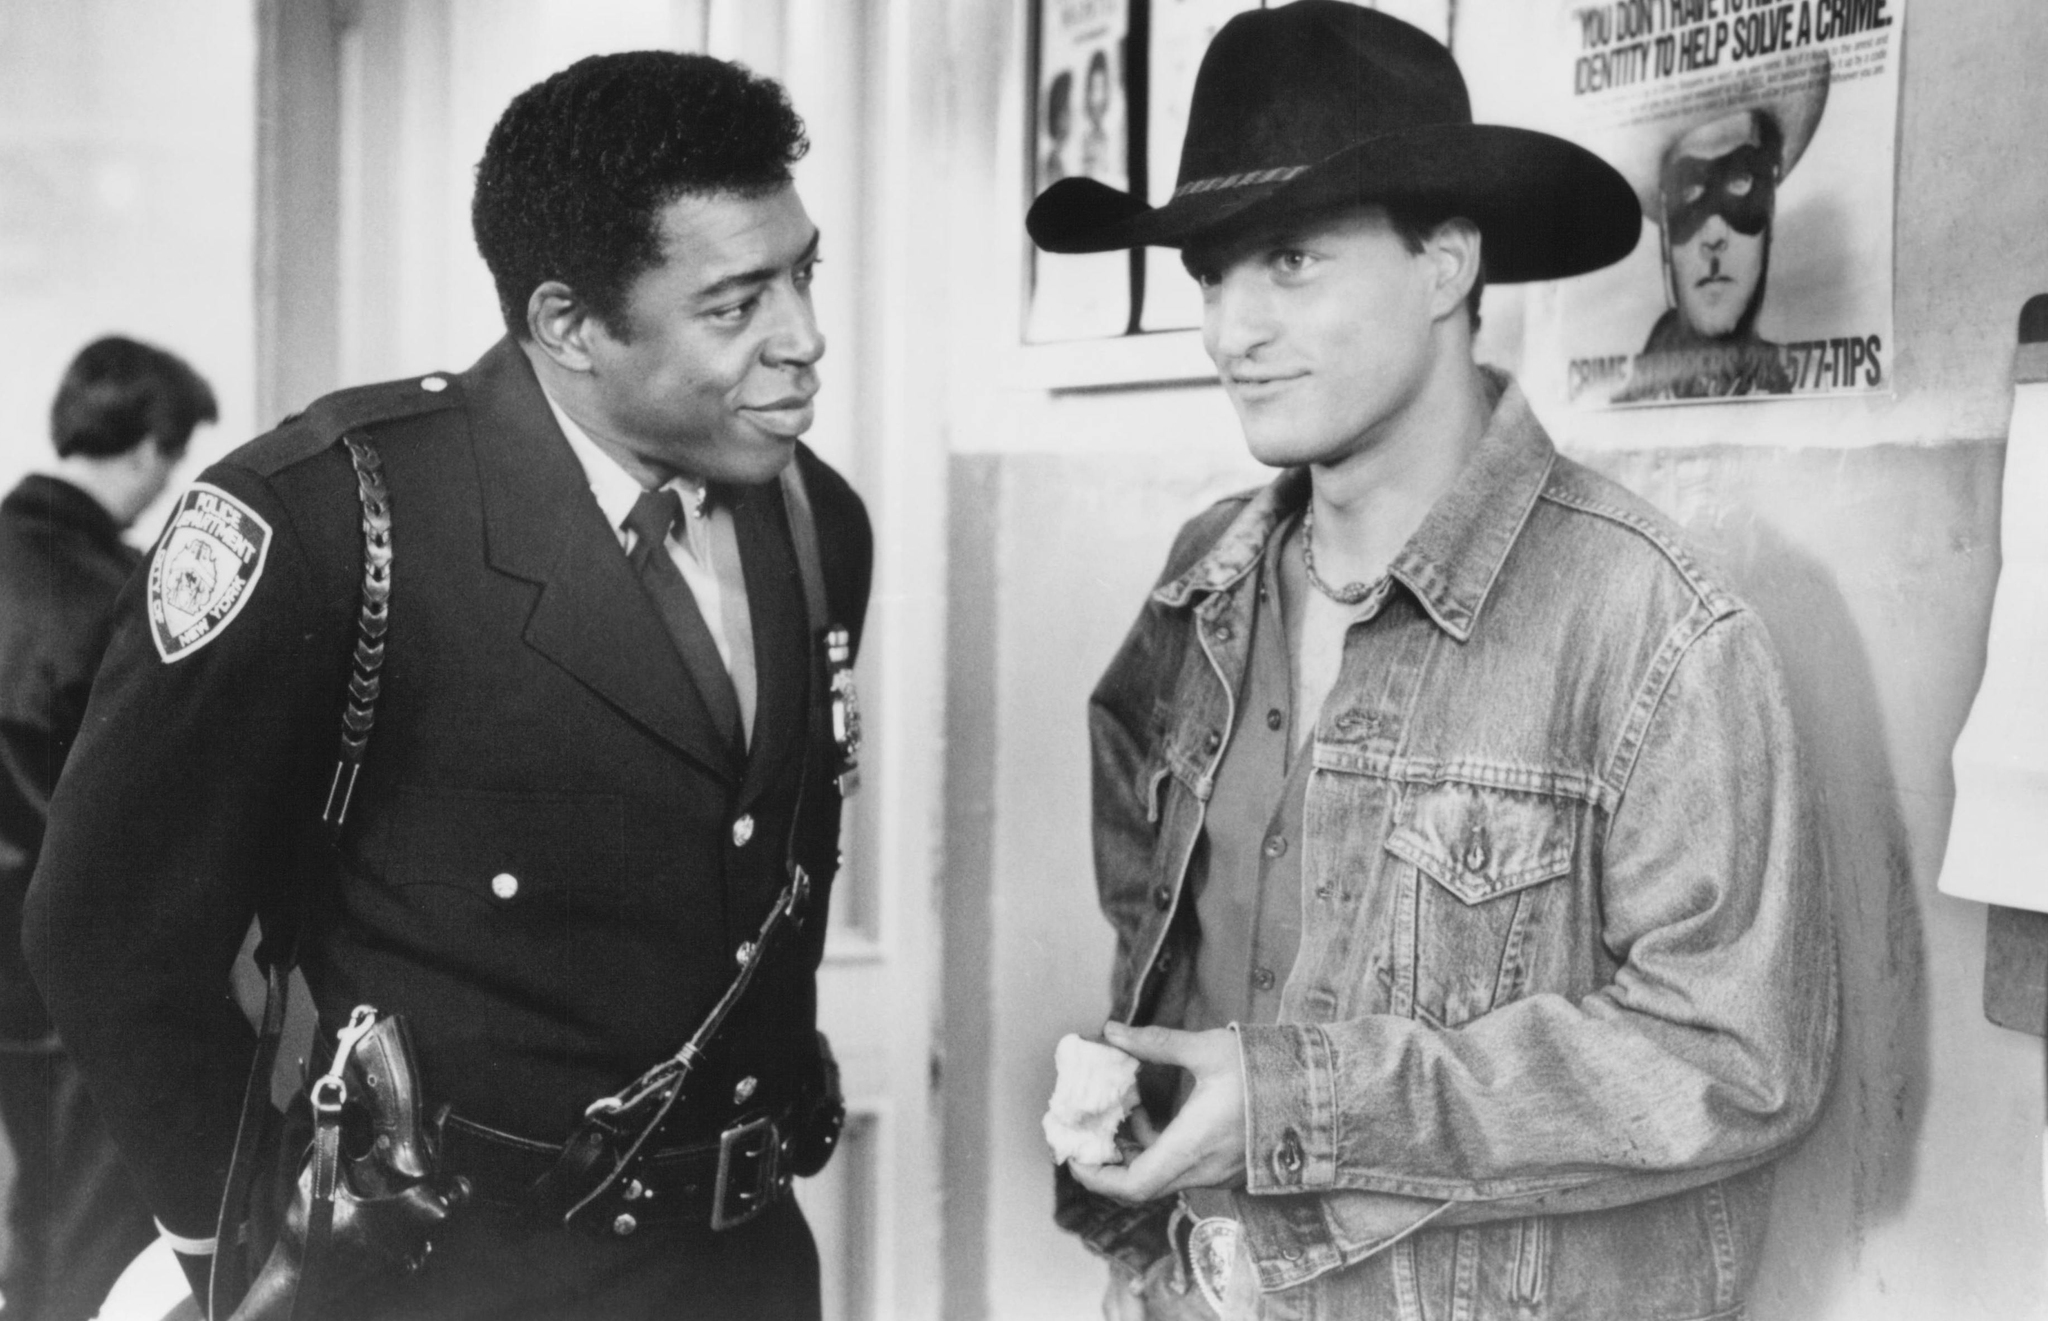 Still of Woody Harrelson and Ernie Hudson in The Cowboy Way (1994)